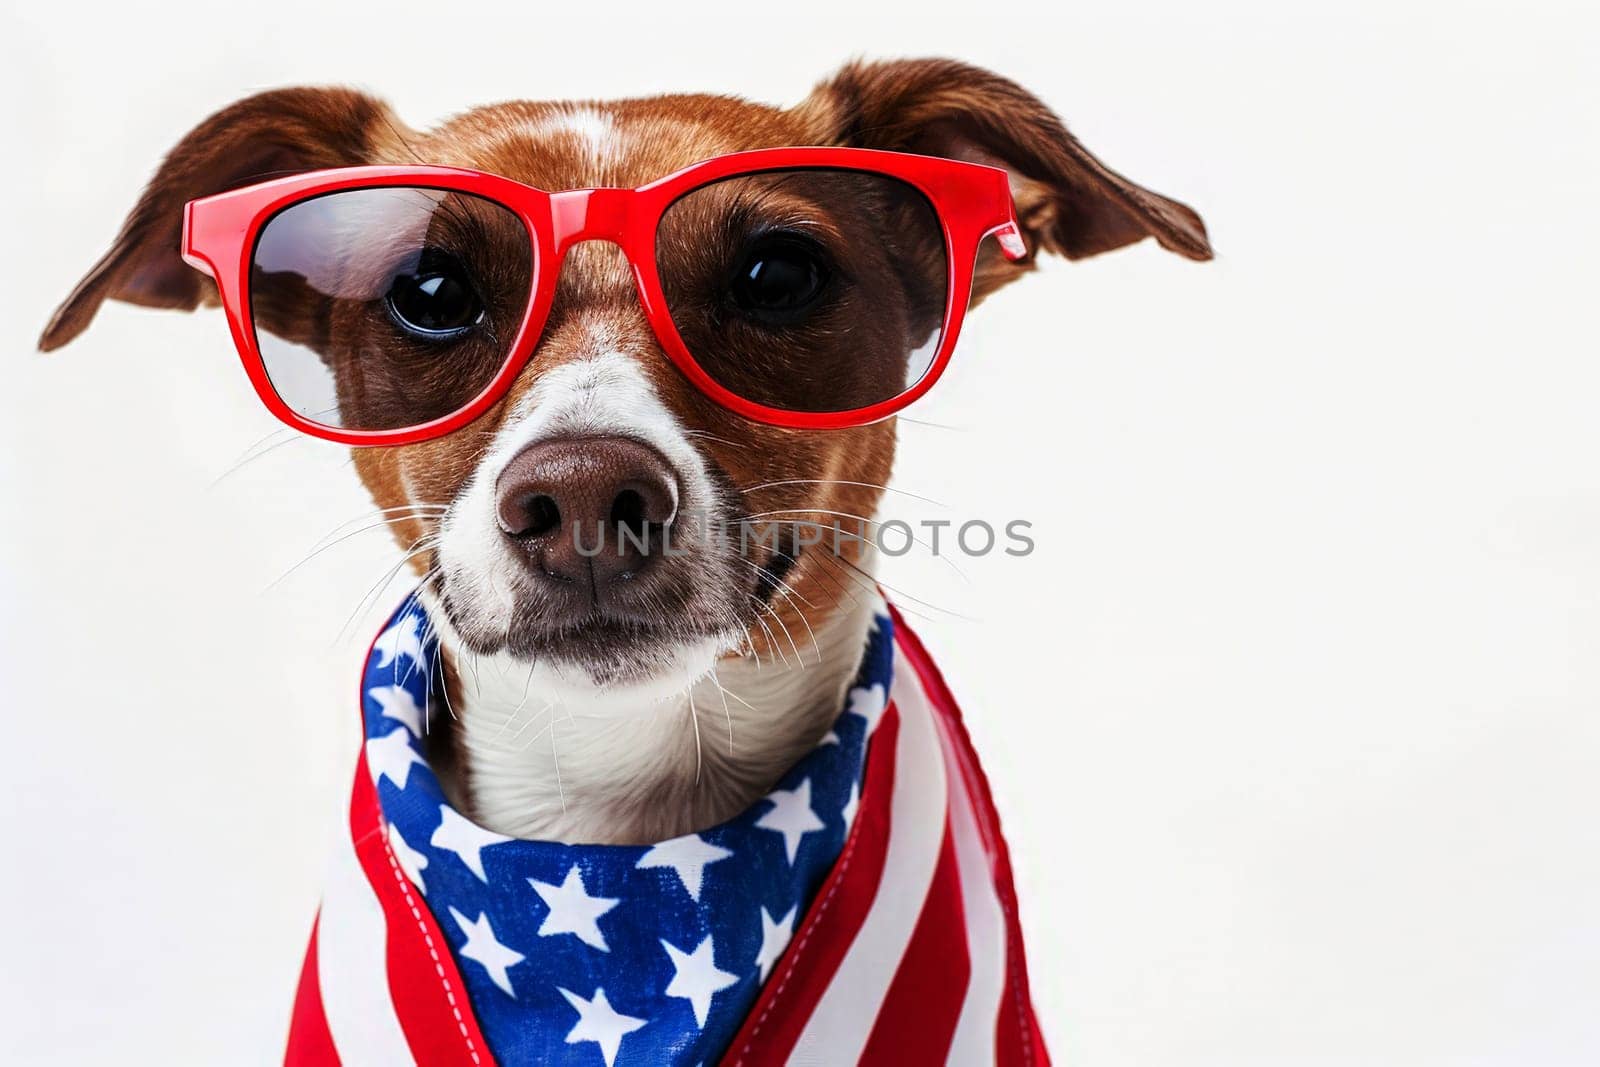 A Russell dog wearing a USA top hat and sunglasses. independence day concept.